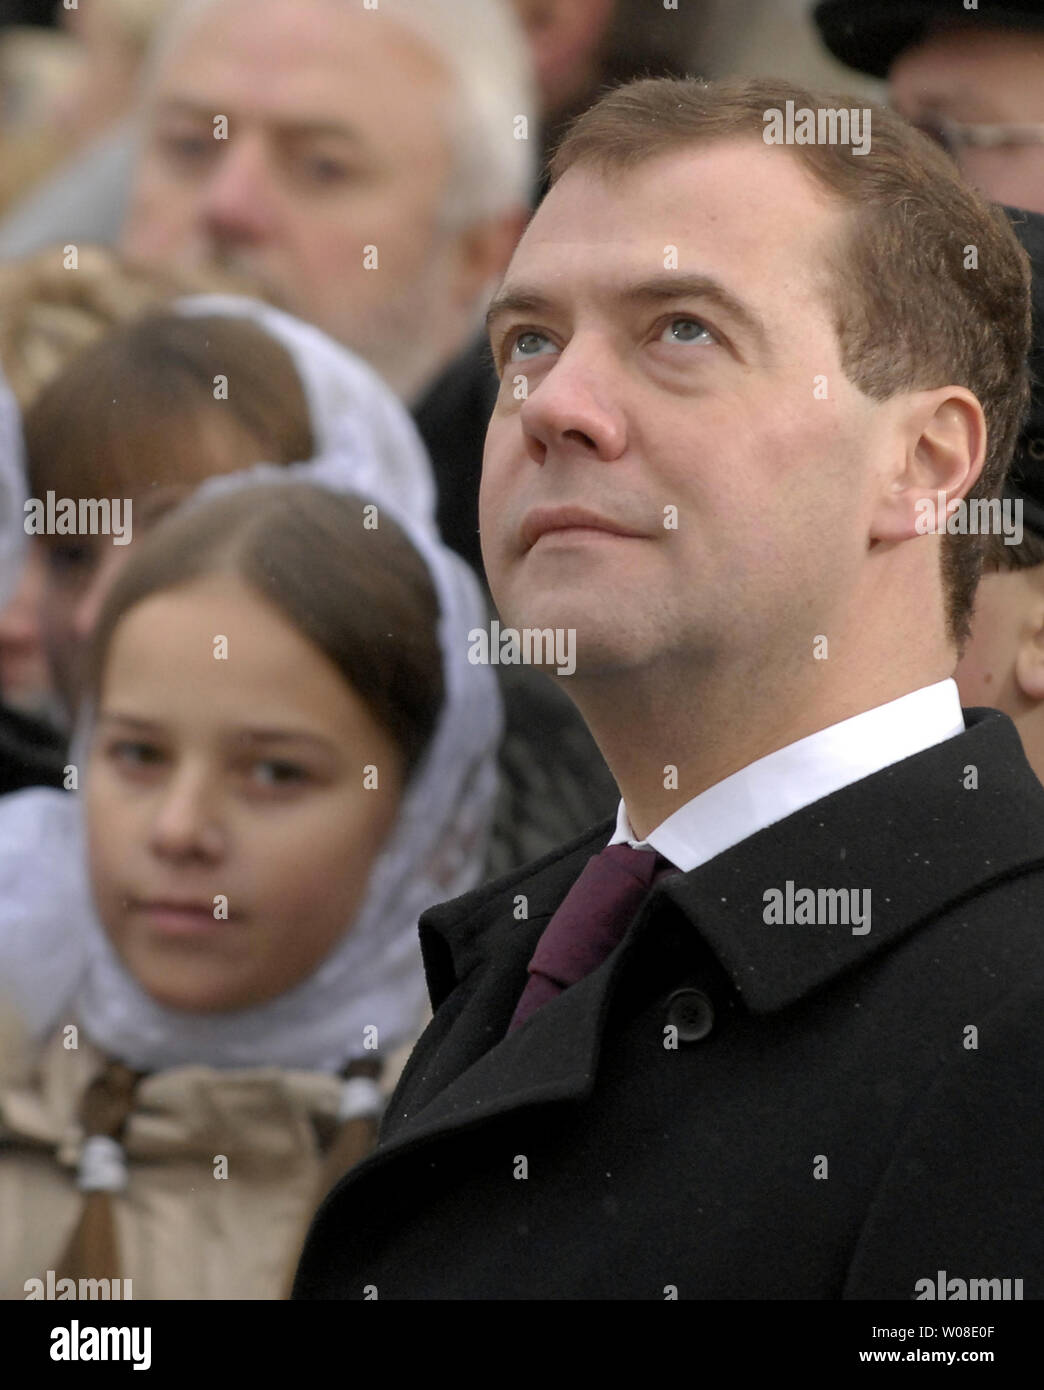 Russian President Dmitry Medvedev stands during the unveiling ceremony of a new chapel to mark the National Unity Day in the ancient Russian town of Suzdal, about 200 km (124 miles) east of Moscow, on November 4, 2009. UPI/Alex Volgin Stock Photo